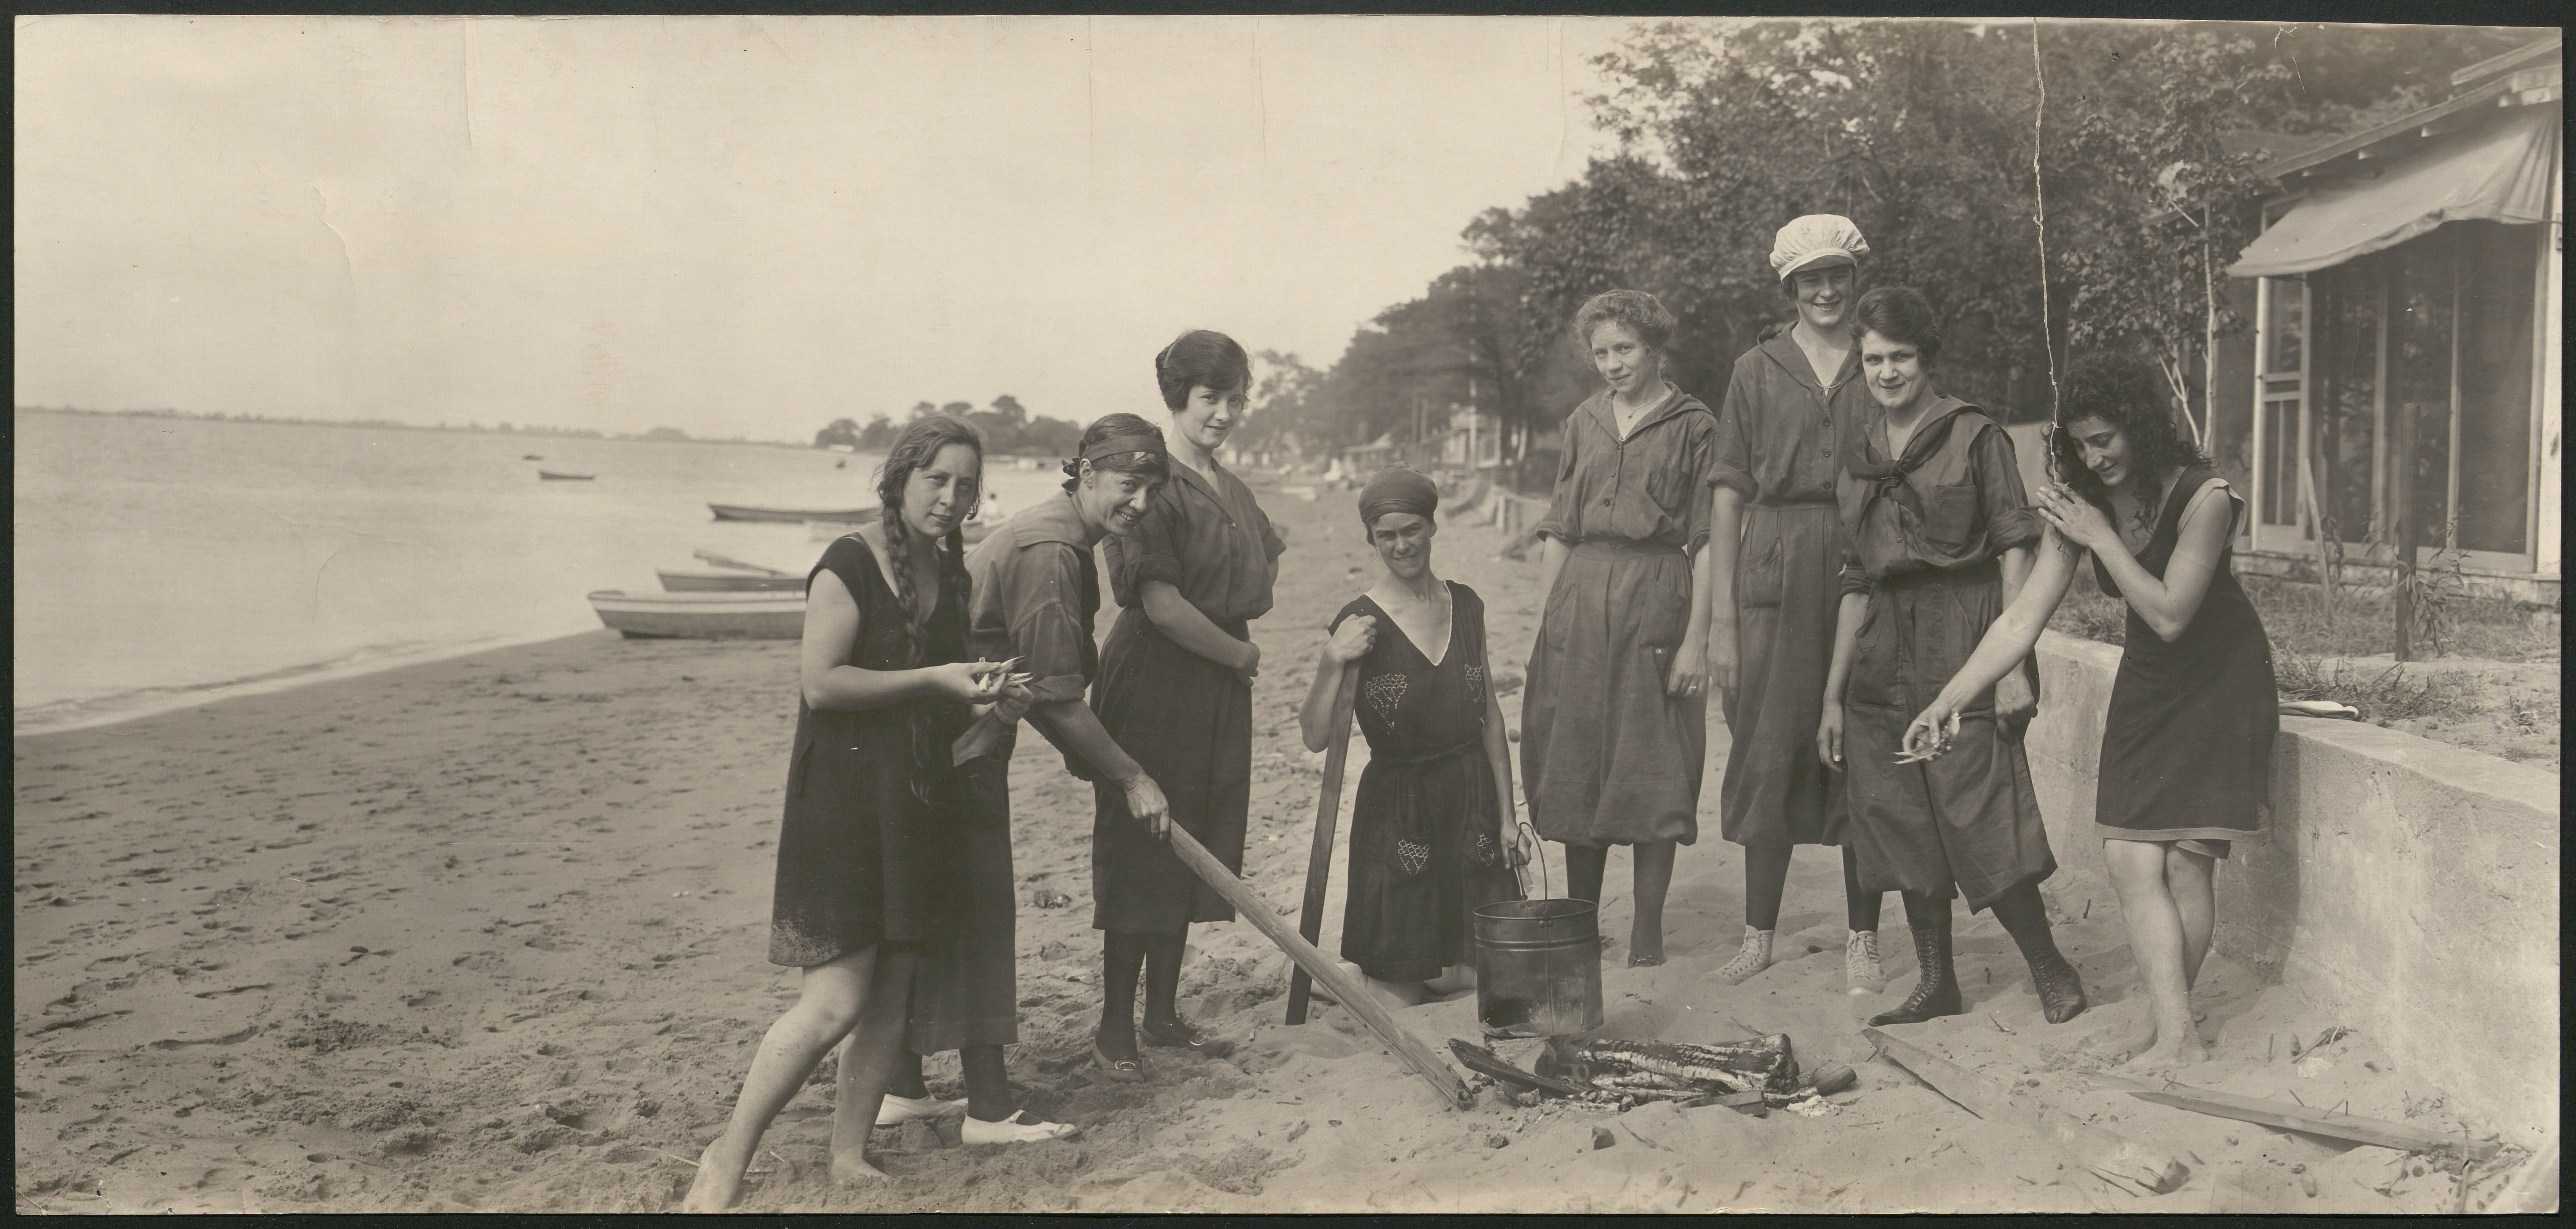 Panoramic black and white photograph of a group of women on a beach assembling a bonfire.